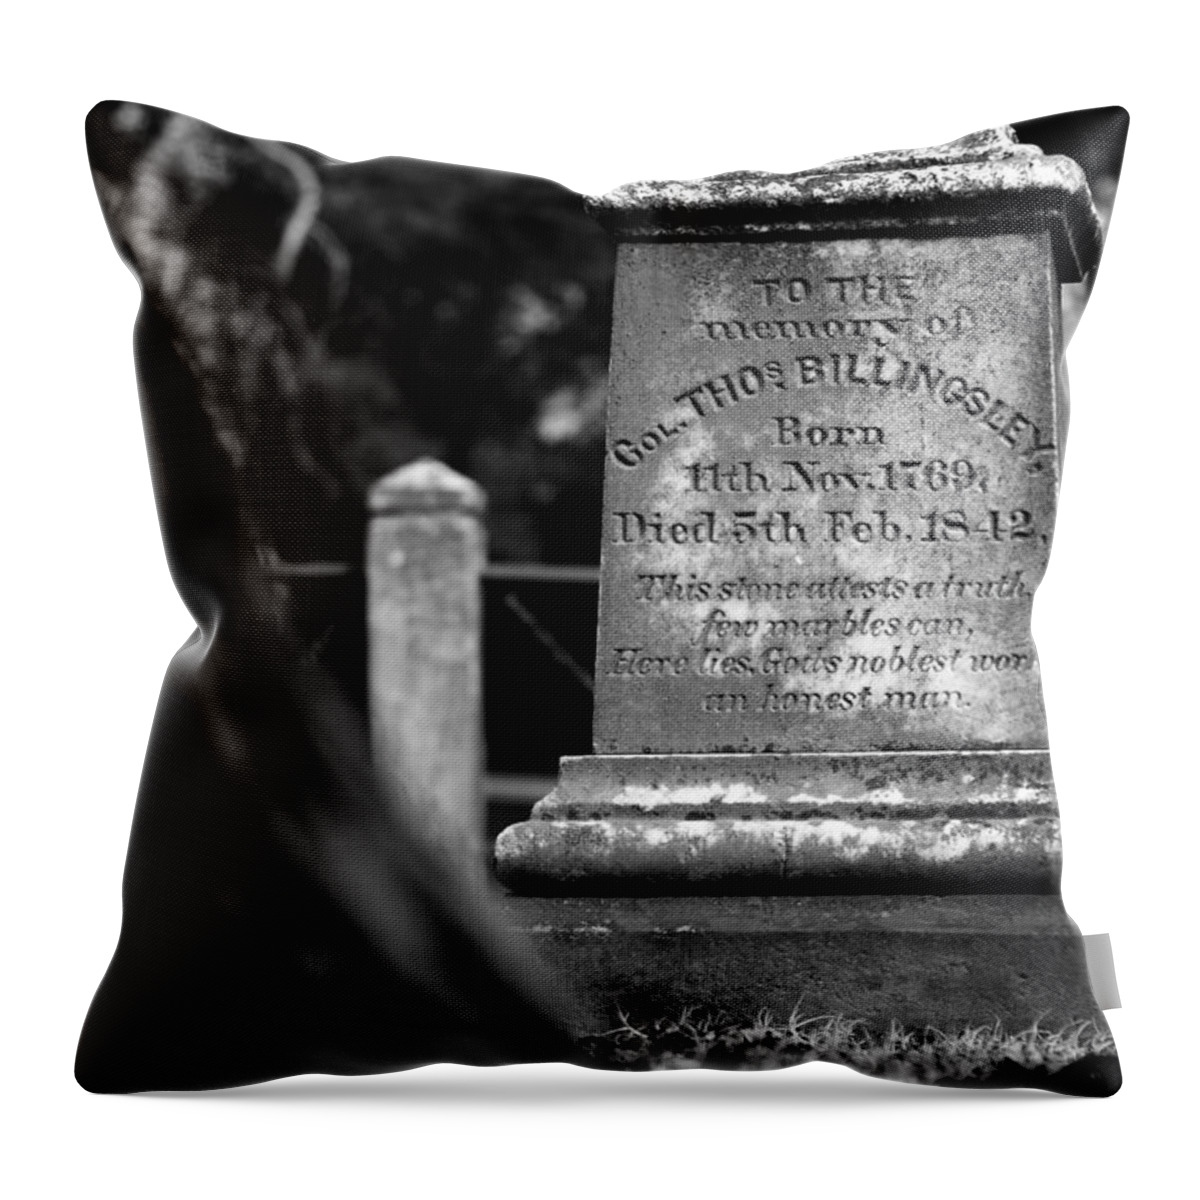 Billingsley Throw Pillow featuring the photograph To the Memory of Colonel Billingsley by Rebecca Sherman